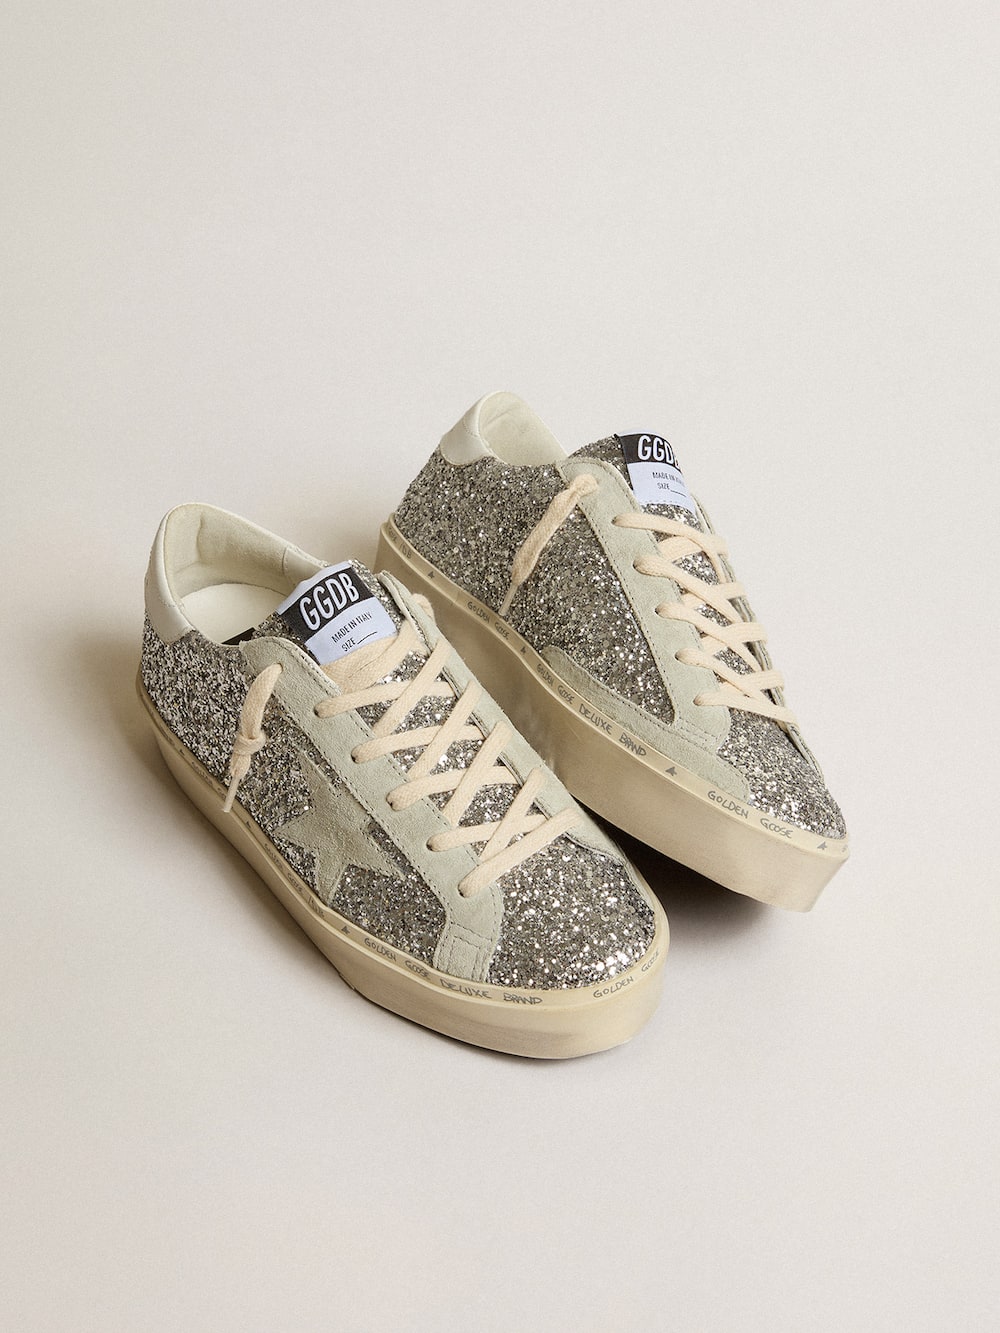 Golden Goose - Women's Hi Star in silver glitter with suede star and white heel tab in 